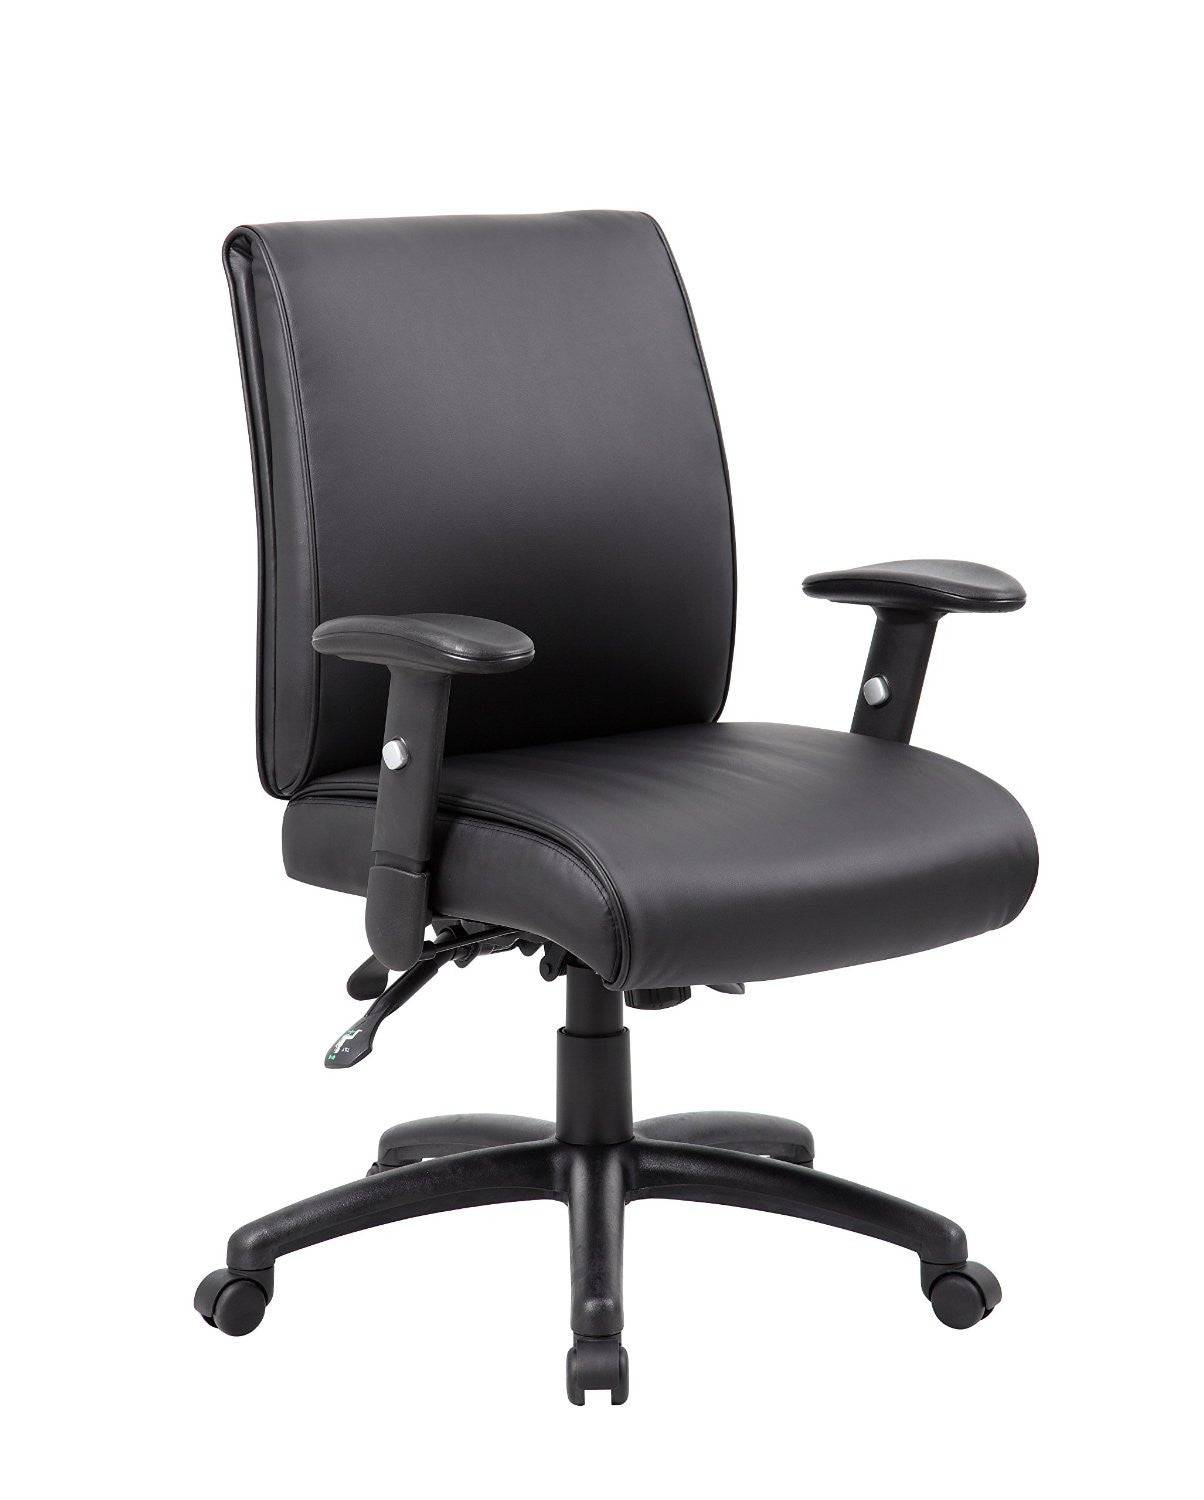 Boss Office Products B716-bk Boss Multi-function Mid Back Executive Chair